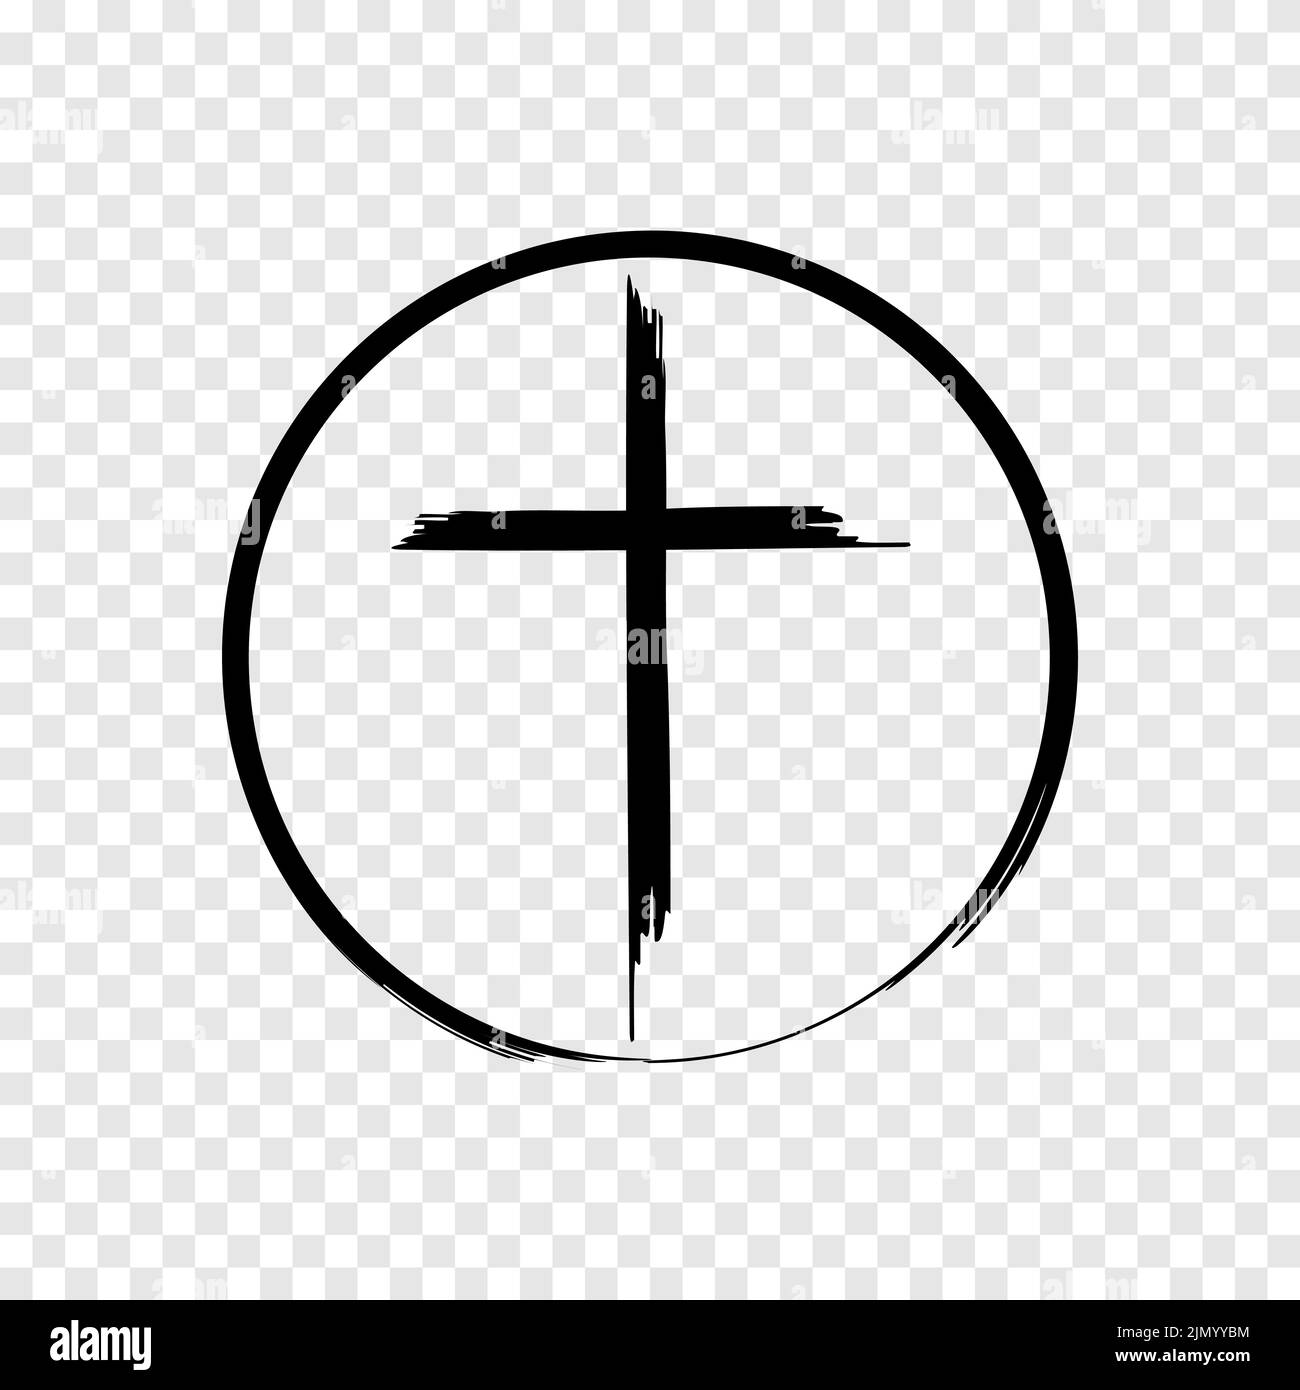 Cross icon in circle brush style Stock Vector